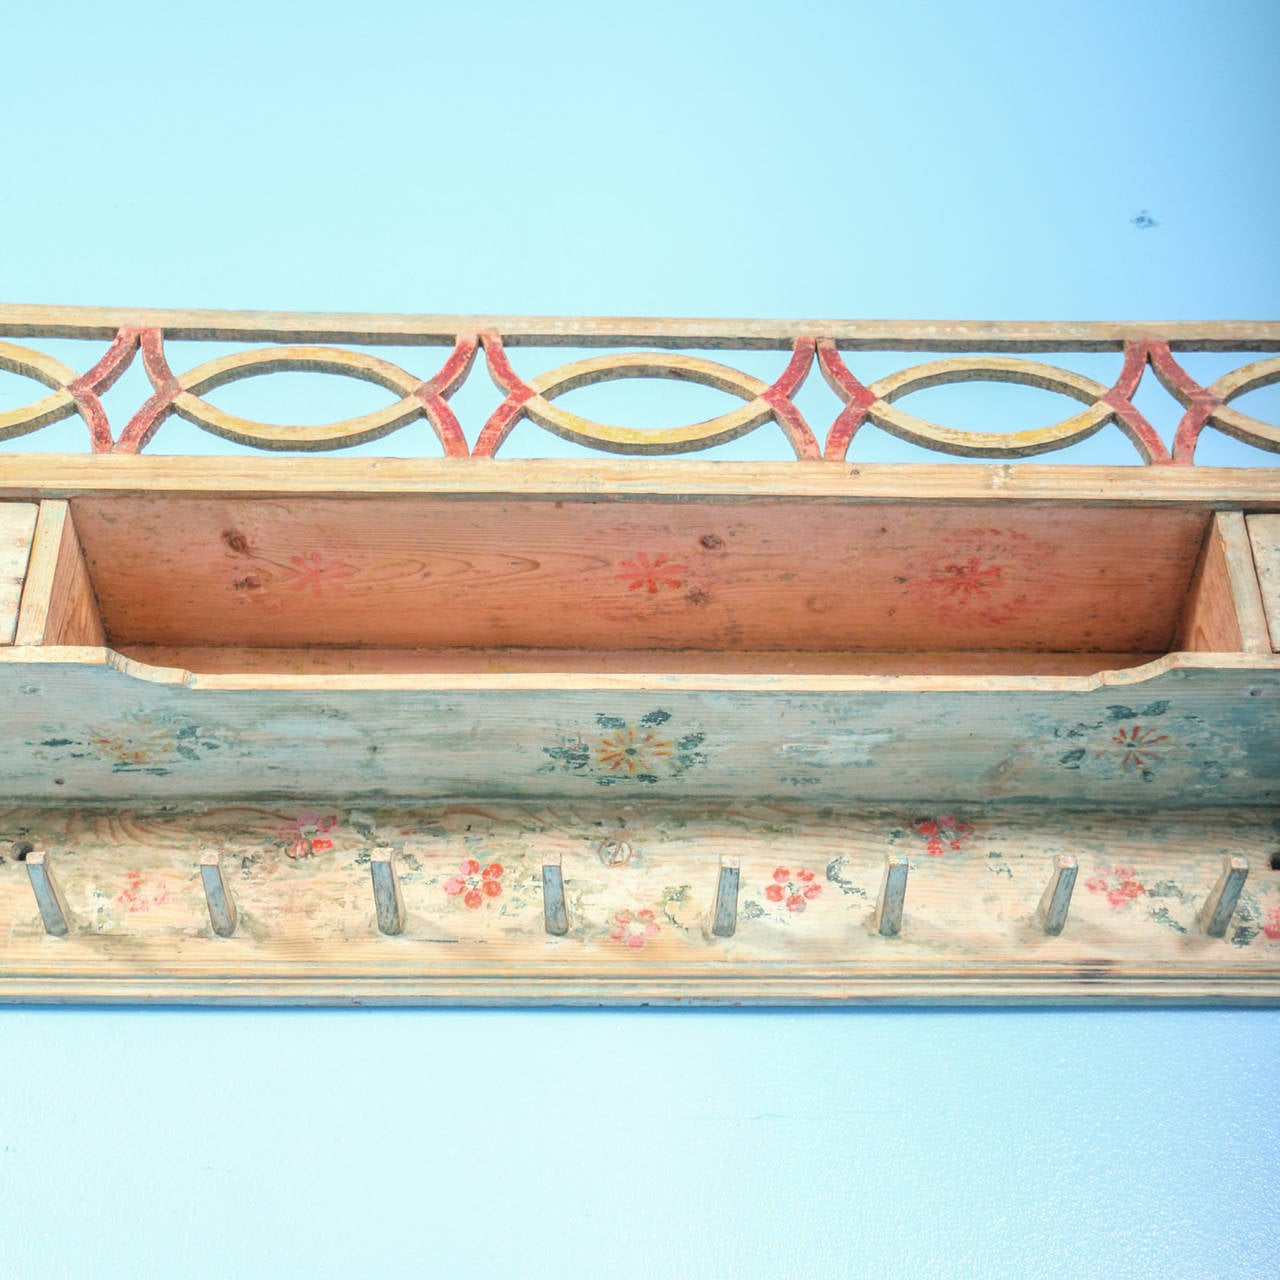 This charming hanging shelf/rack still maintains its original soft white paint, accented with a delightful green leaf and orange/red floral motif. Please examine the close up photos to appreciate the carved details as well. While painted racks were